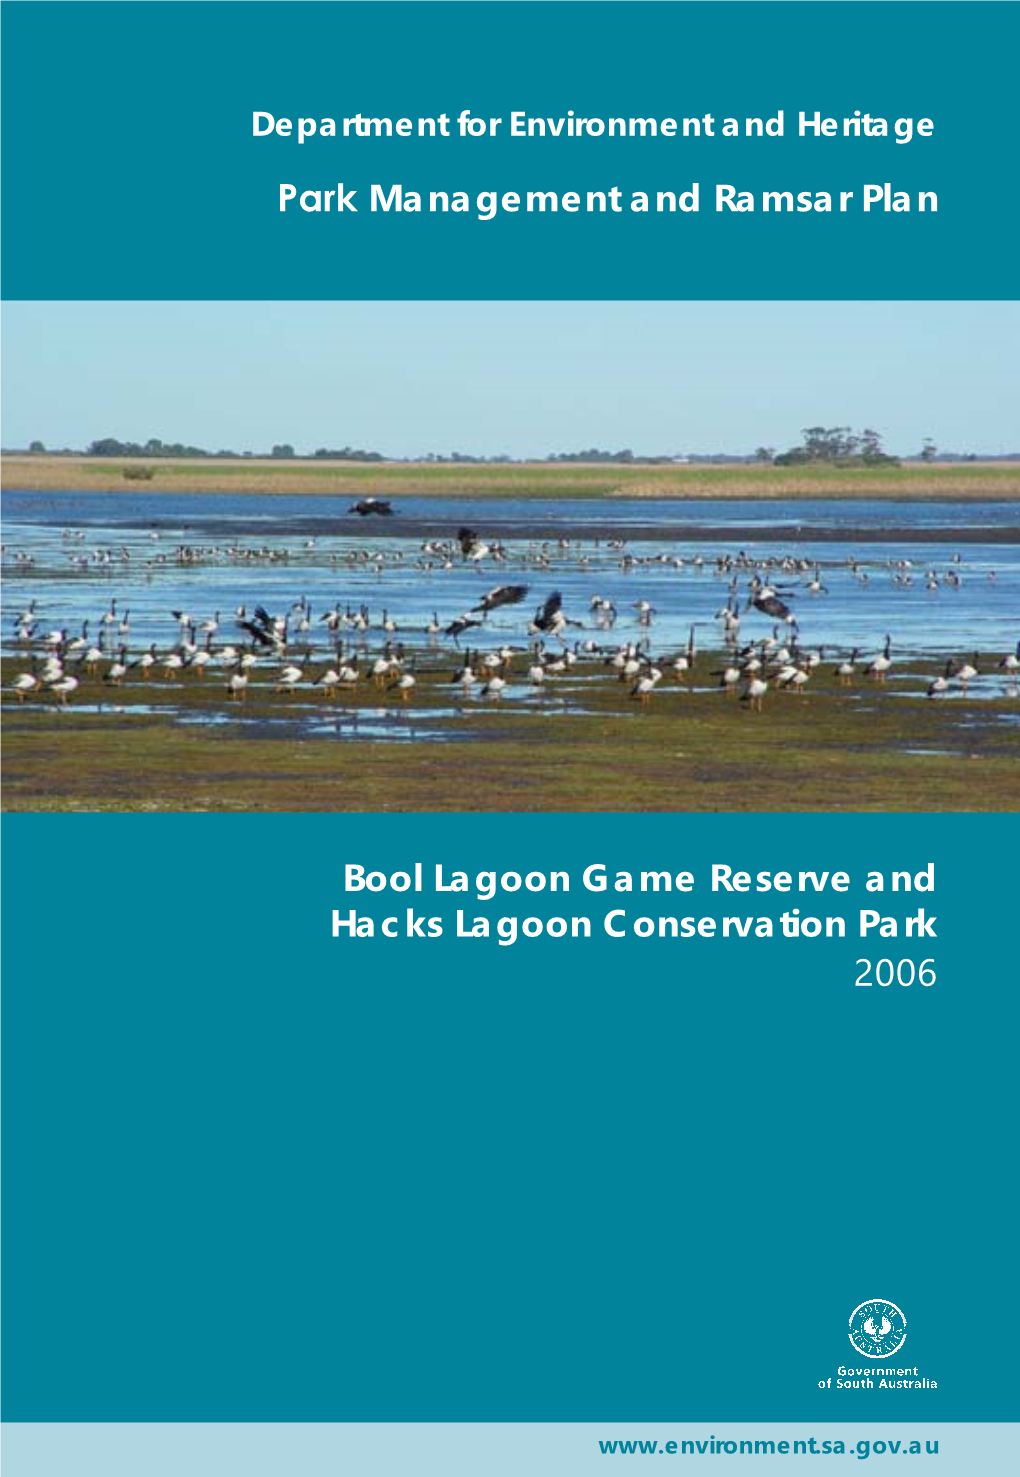 Bool Lagoon Game Reserve and Hacks Lagoon Conservation Park Management and Ramsar Plan, Adelaide, South Australia’